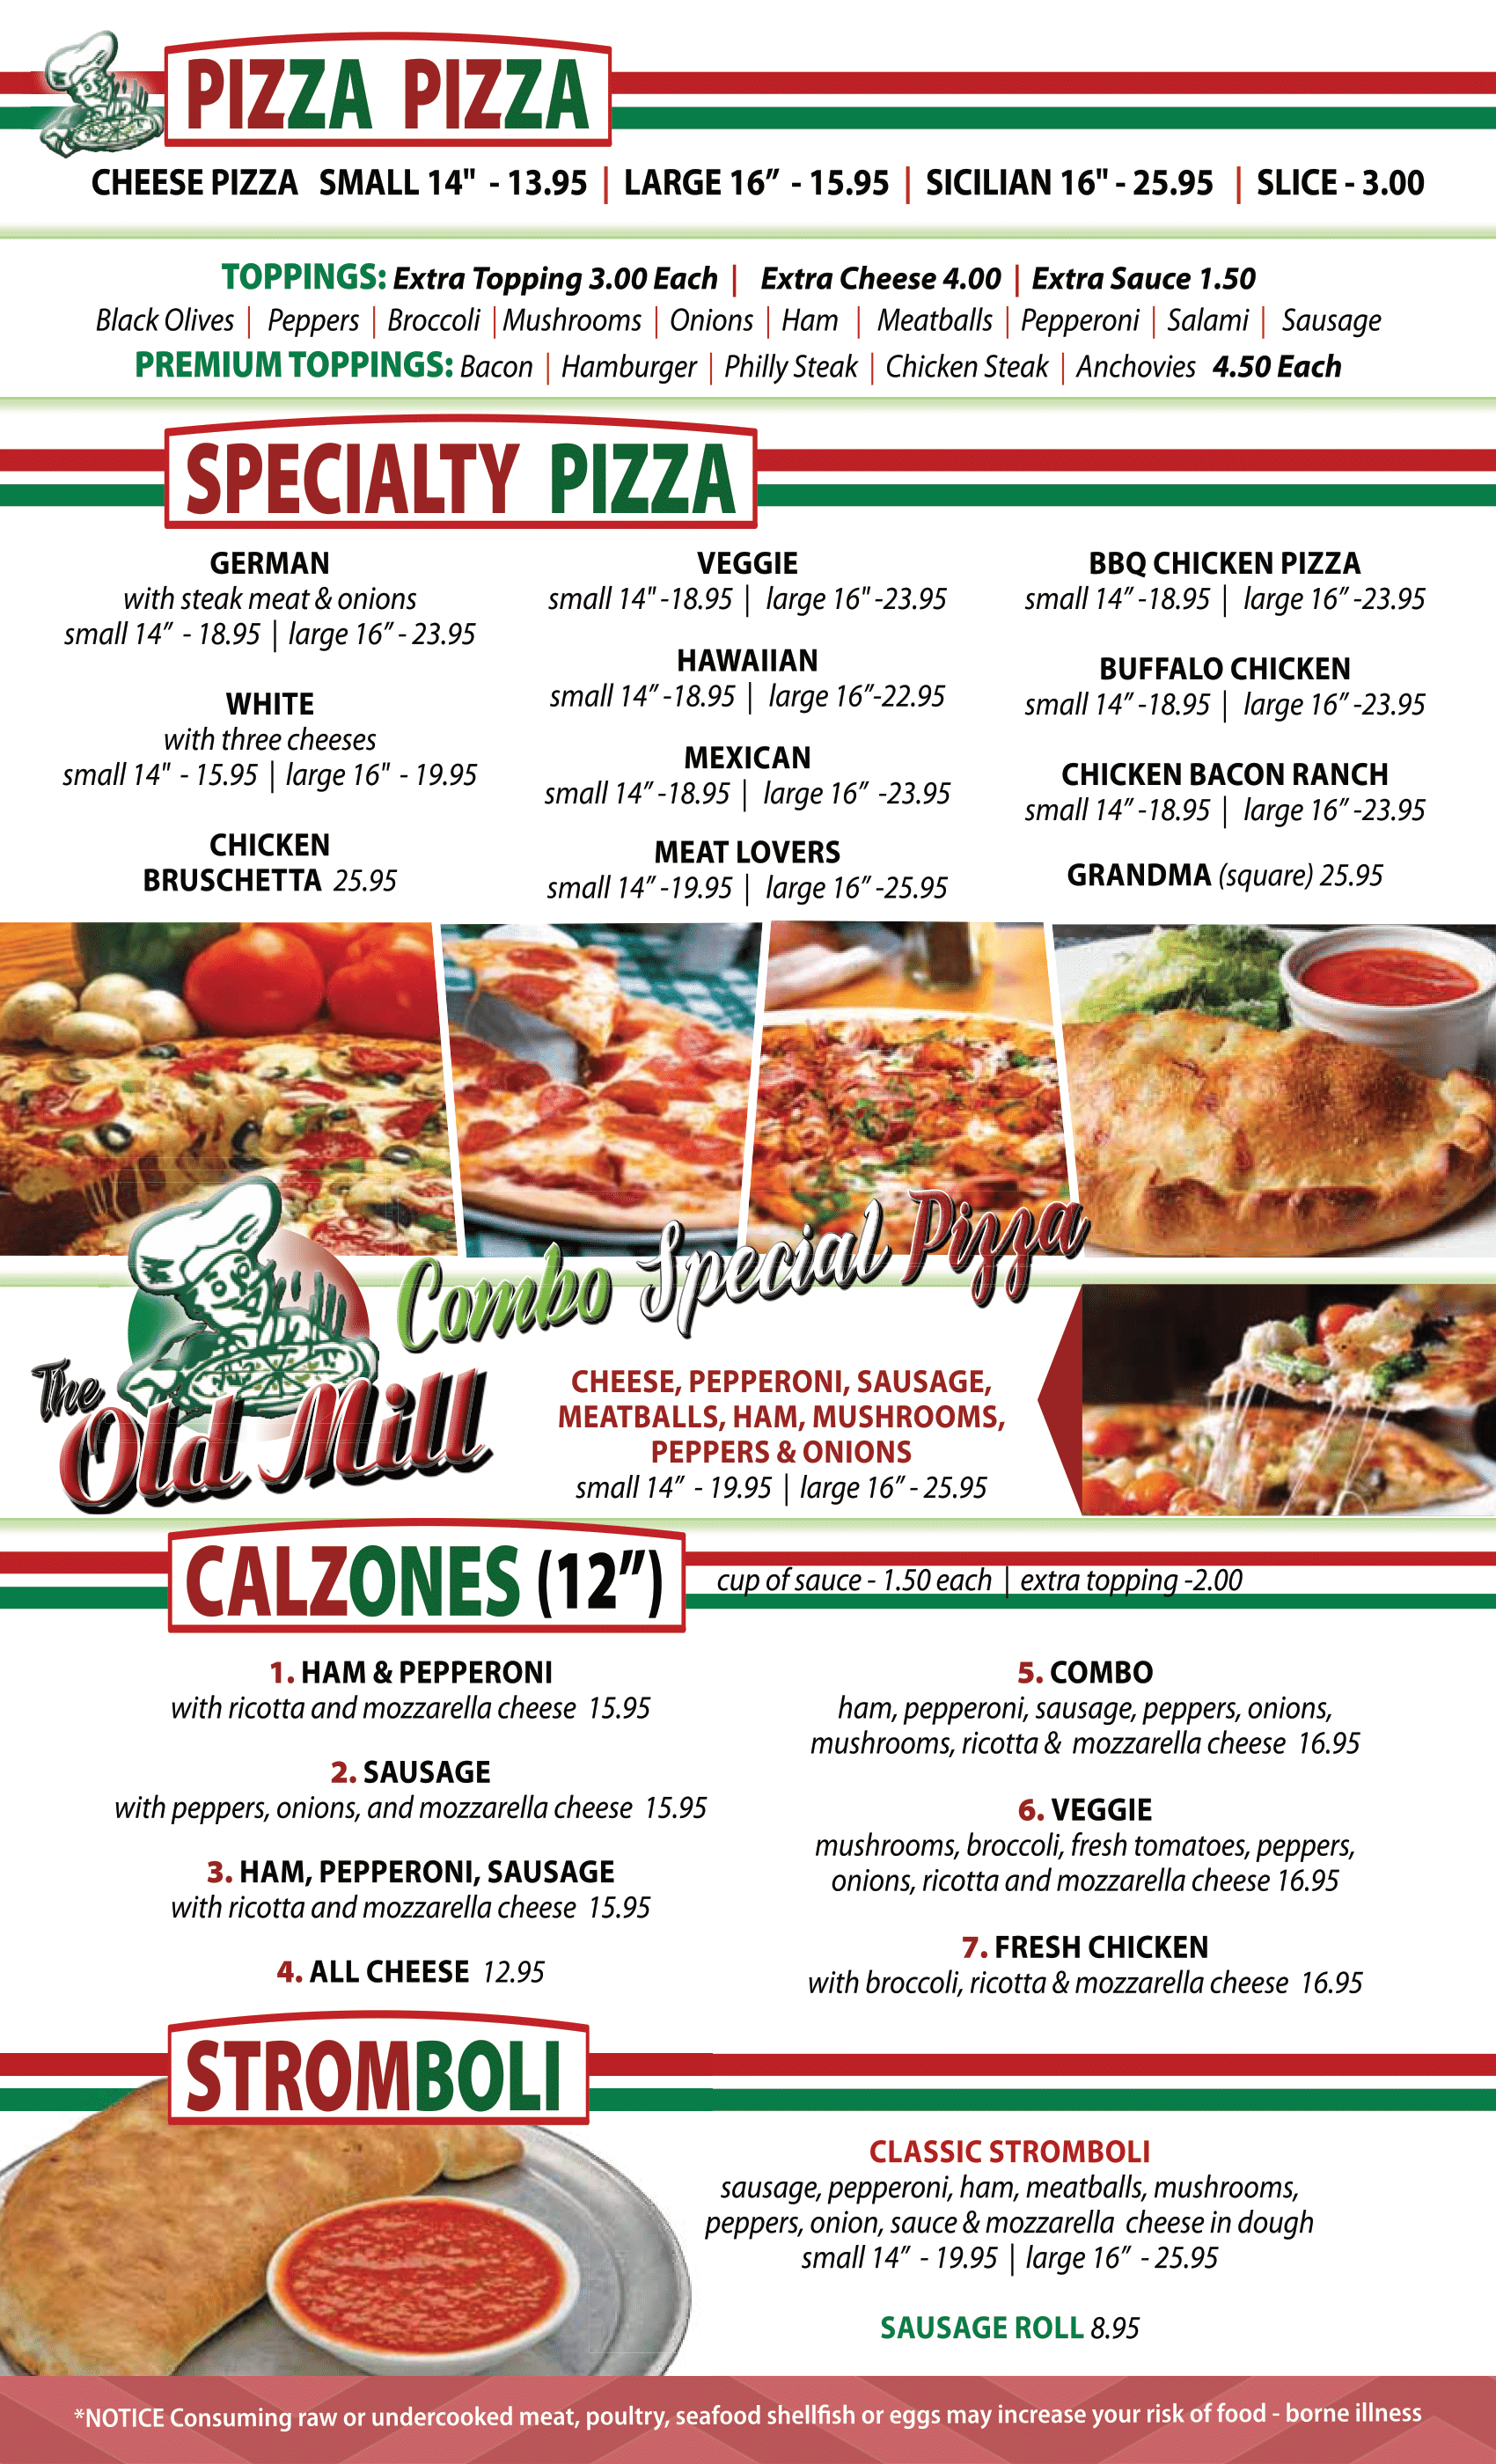 Old Mill Pizzeria - Pizza, Calzones, and Stromboli Menu